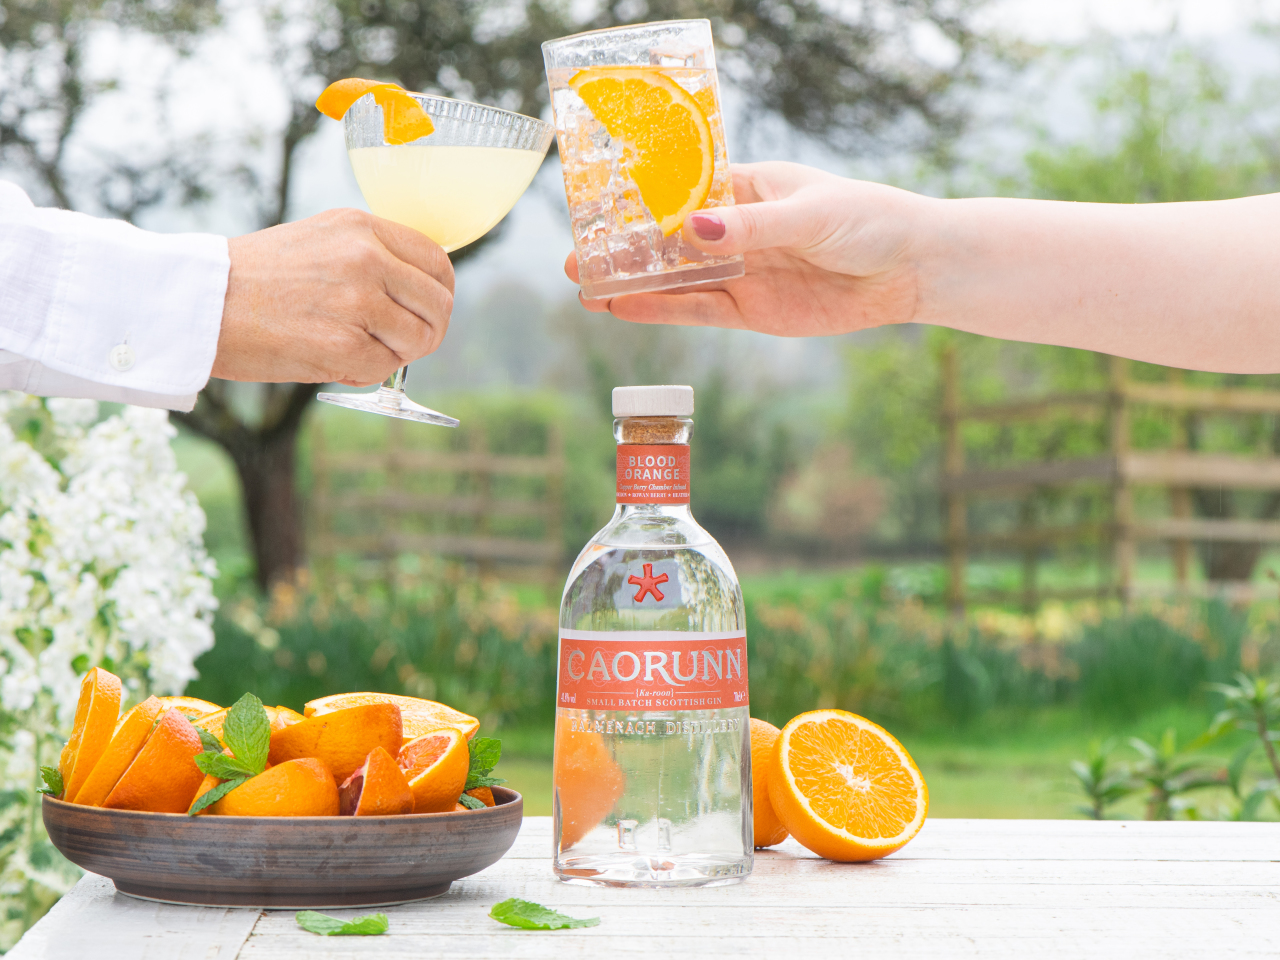 Garden Party Cheers with Blood Orange Bottle Perfect Serve and Caorunnita